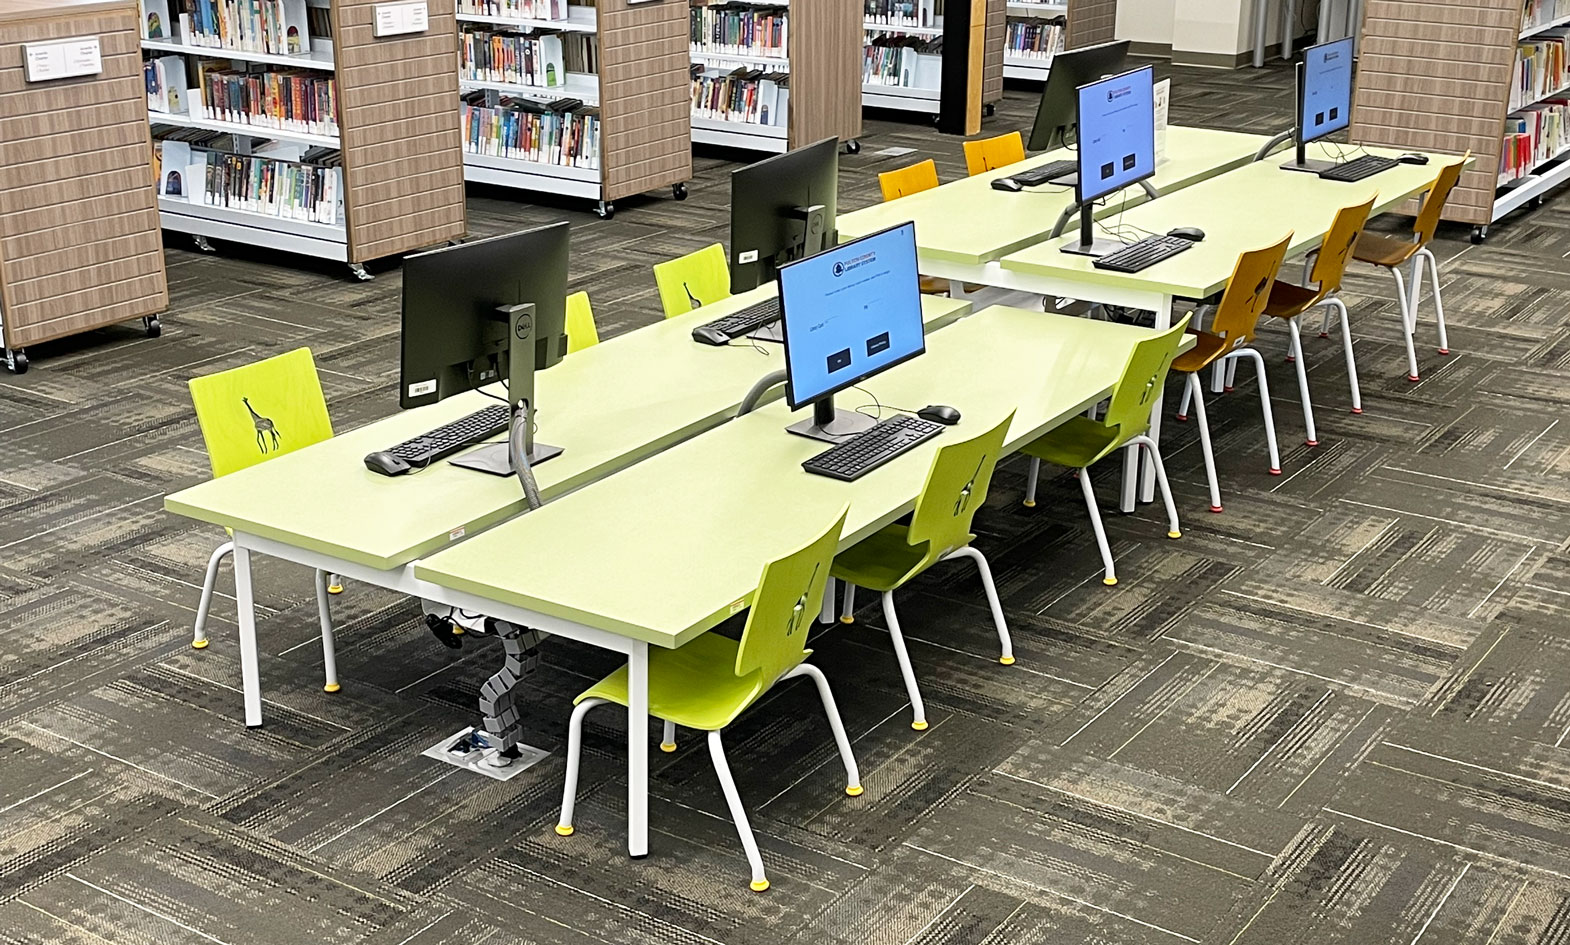 Large, dual height, children's computer table in public library